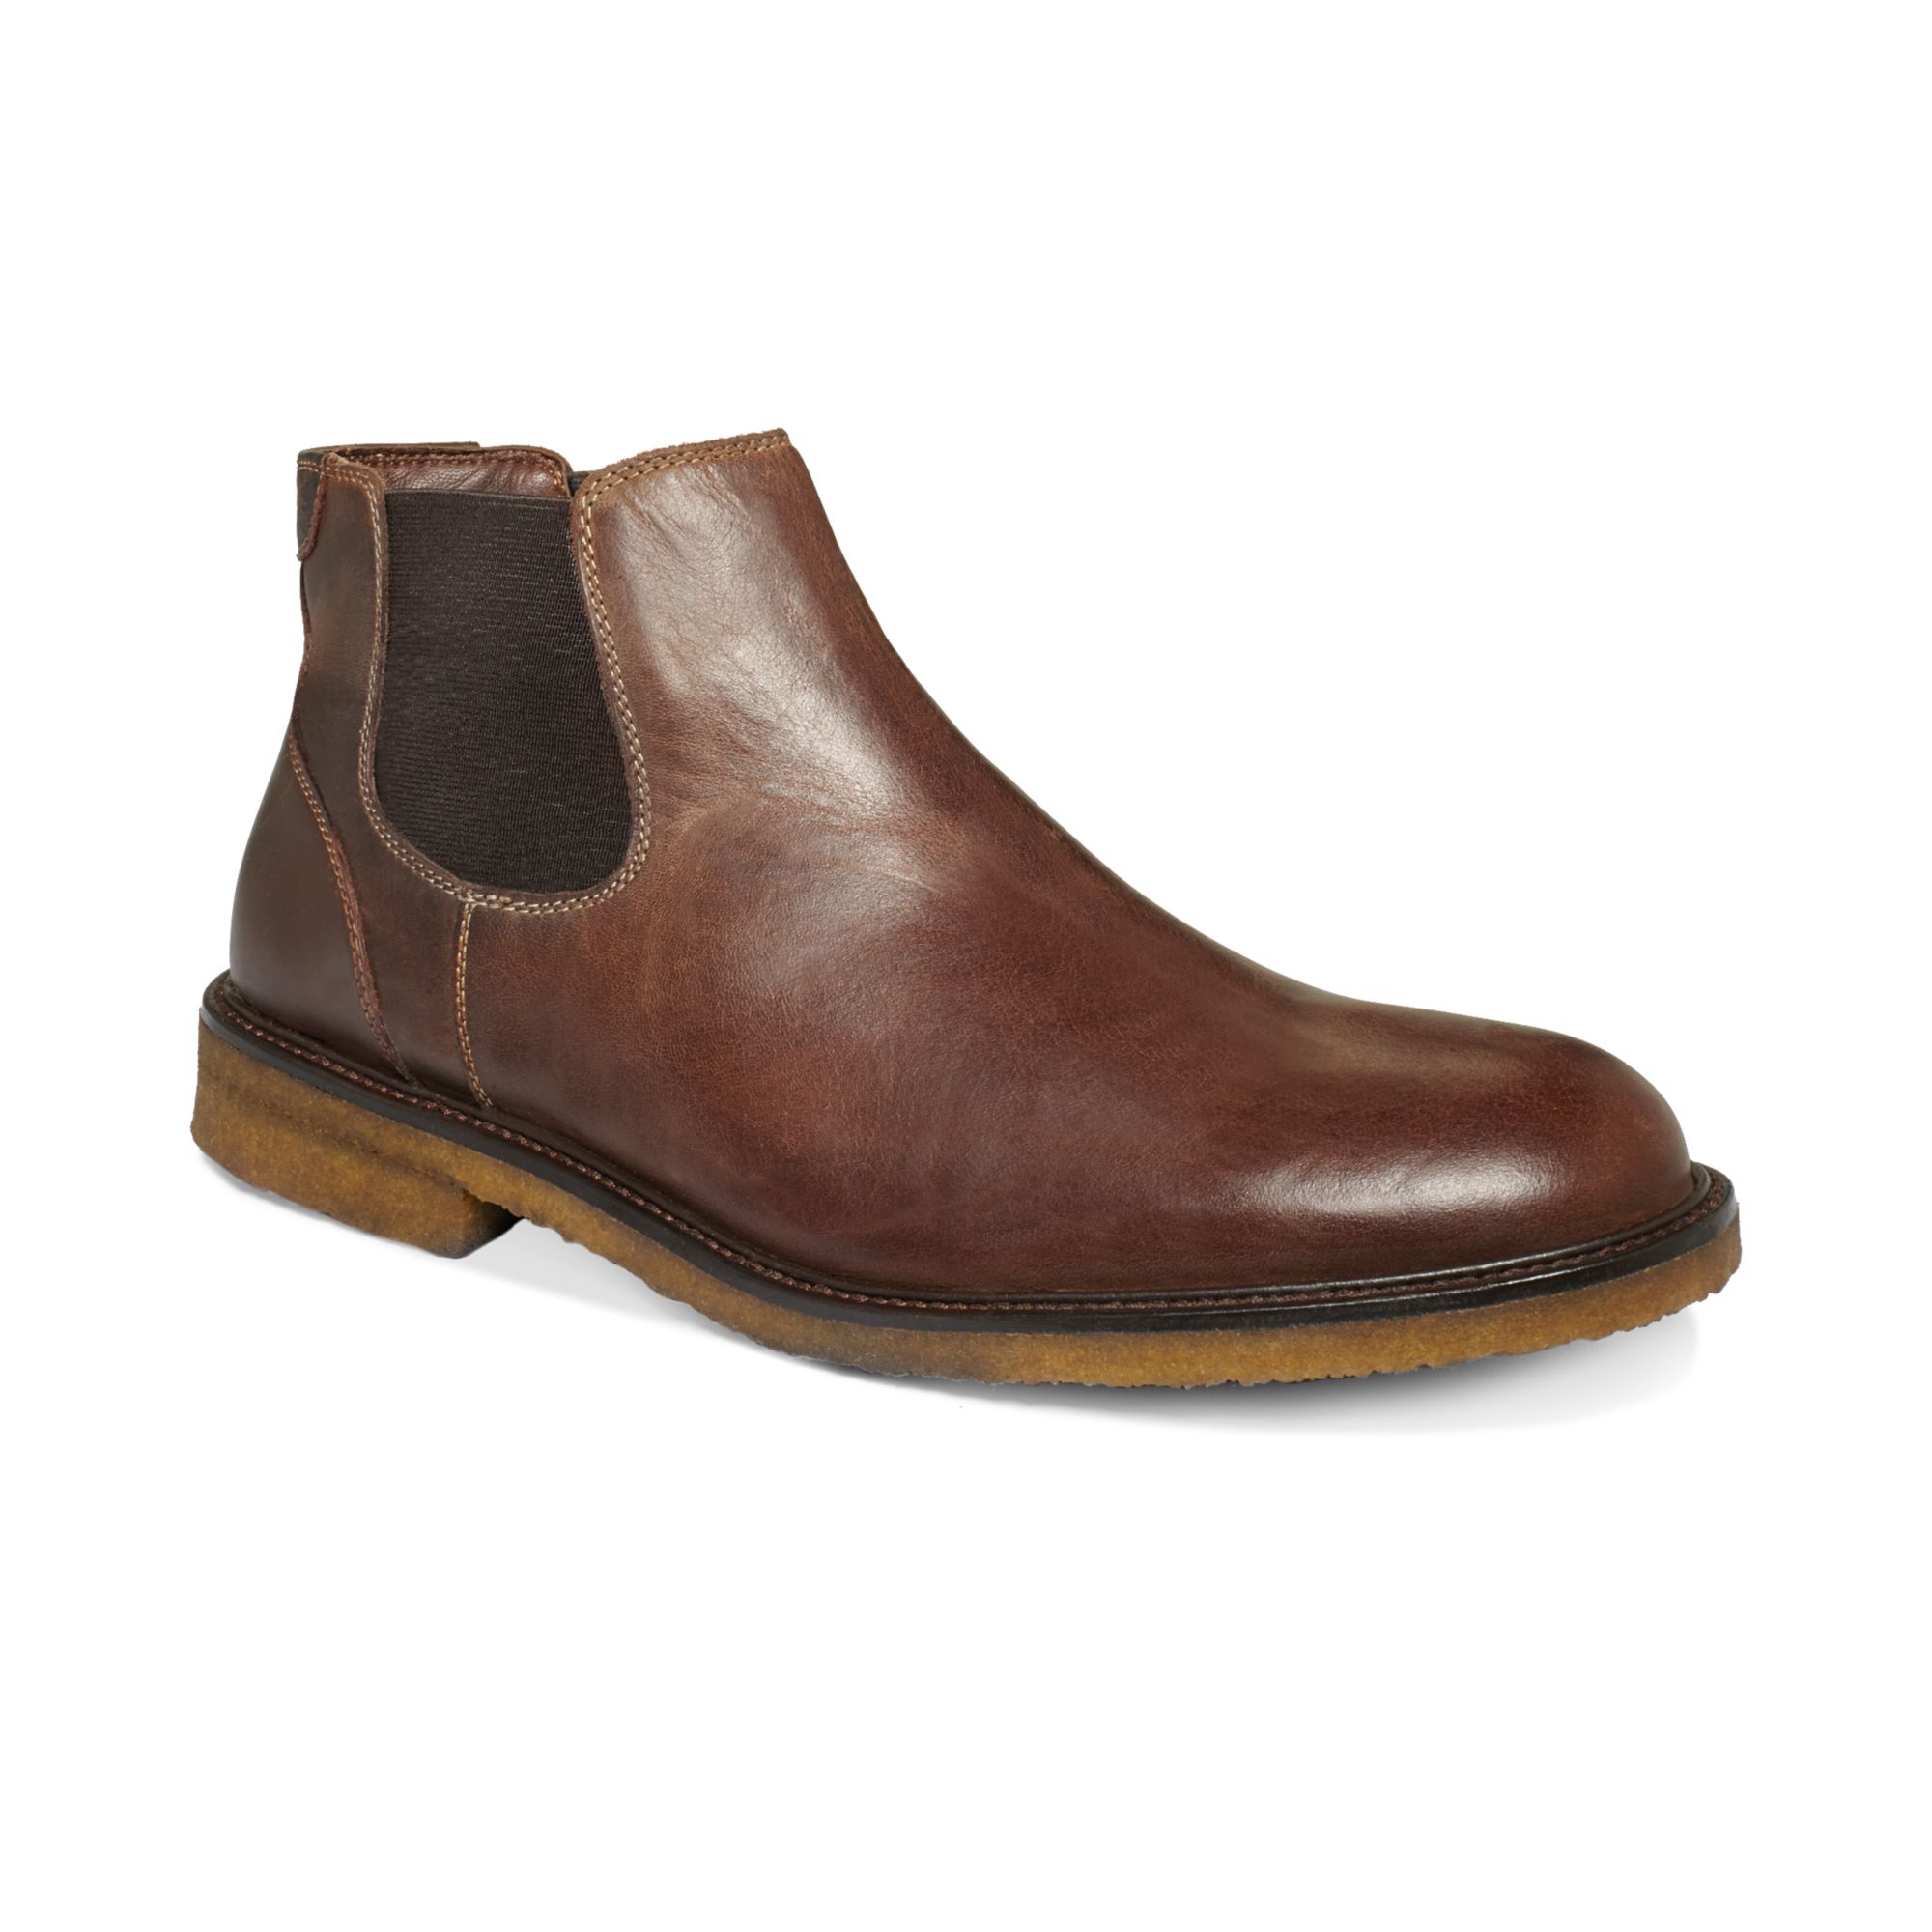 Lyst - Johnston & Murphy Copeland Gore Boots in Brown for Men